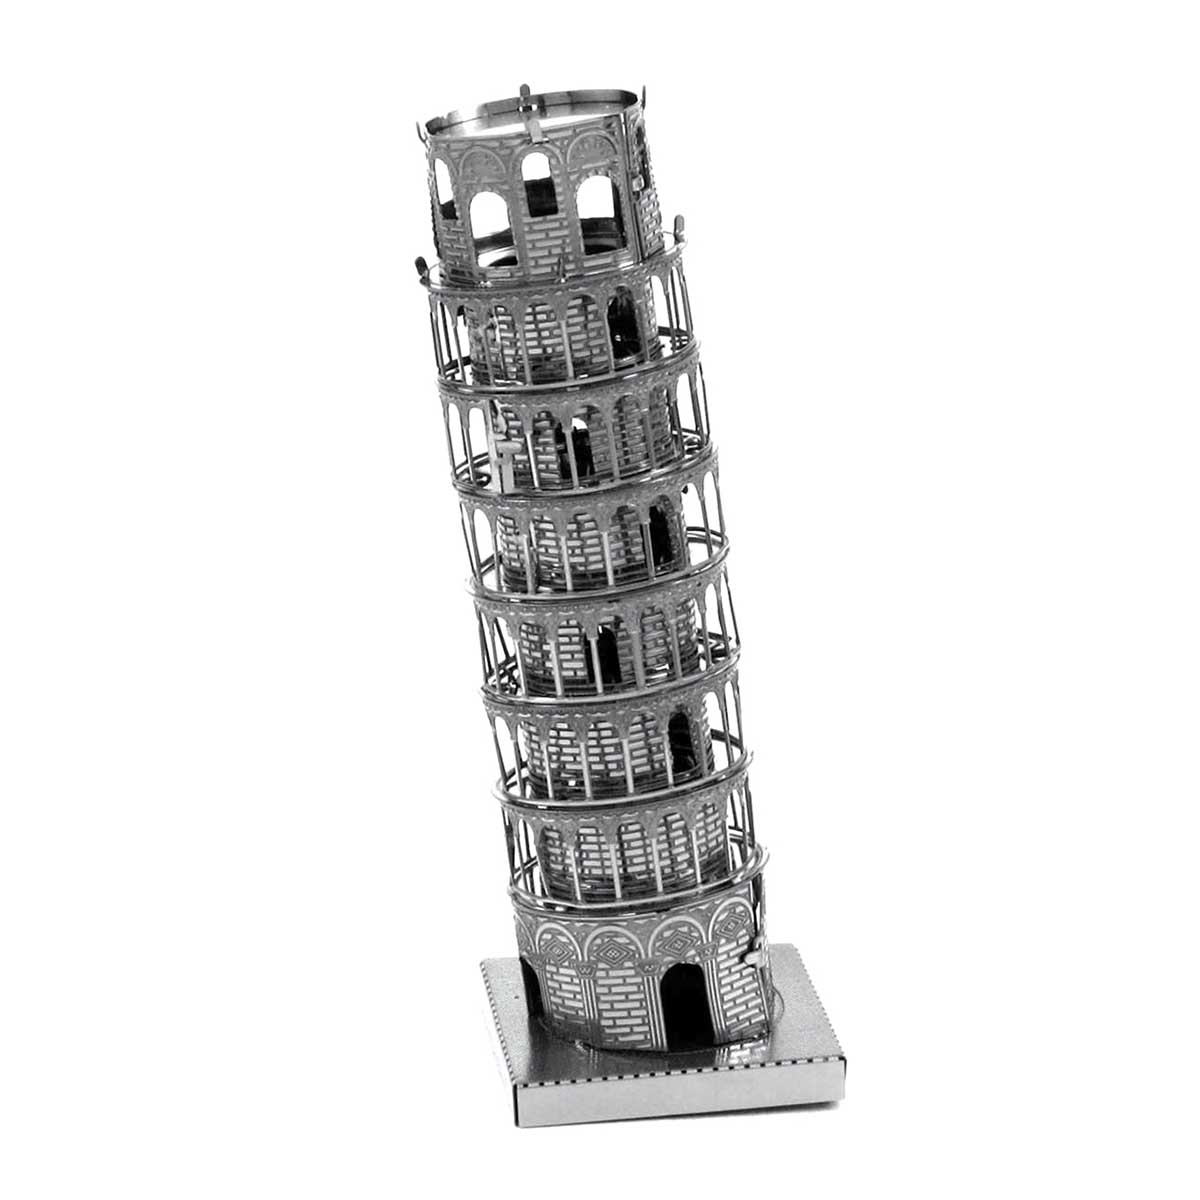 Leaning Tower of Pisa Landmarks & Monuments 3D Puzzle